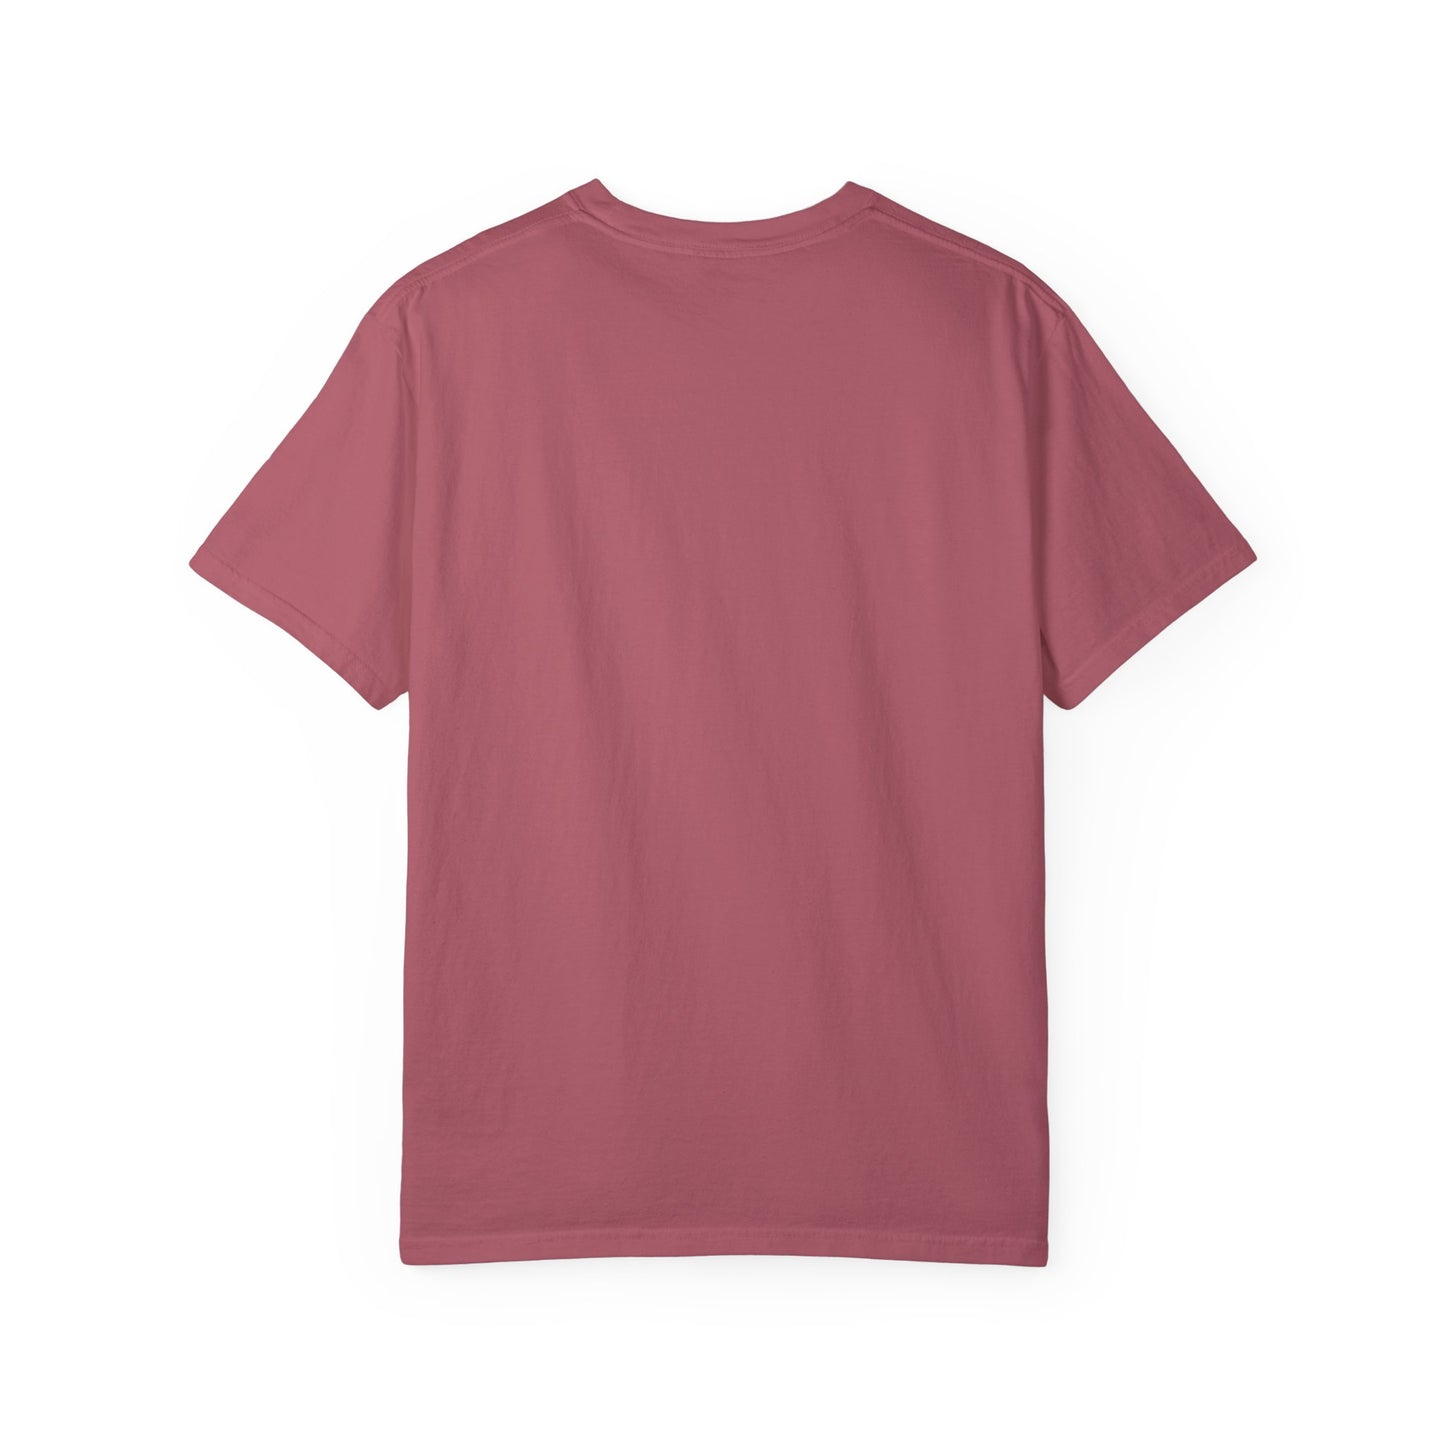 PoM's Mindfulness series ... "Mental Health Check" ... Unisex Garment-Dyed T-shirt (100% pre-shrunk cotton, soft washed - six sizes (S-3XL), 9 background colours)